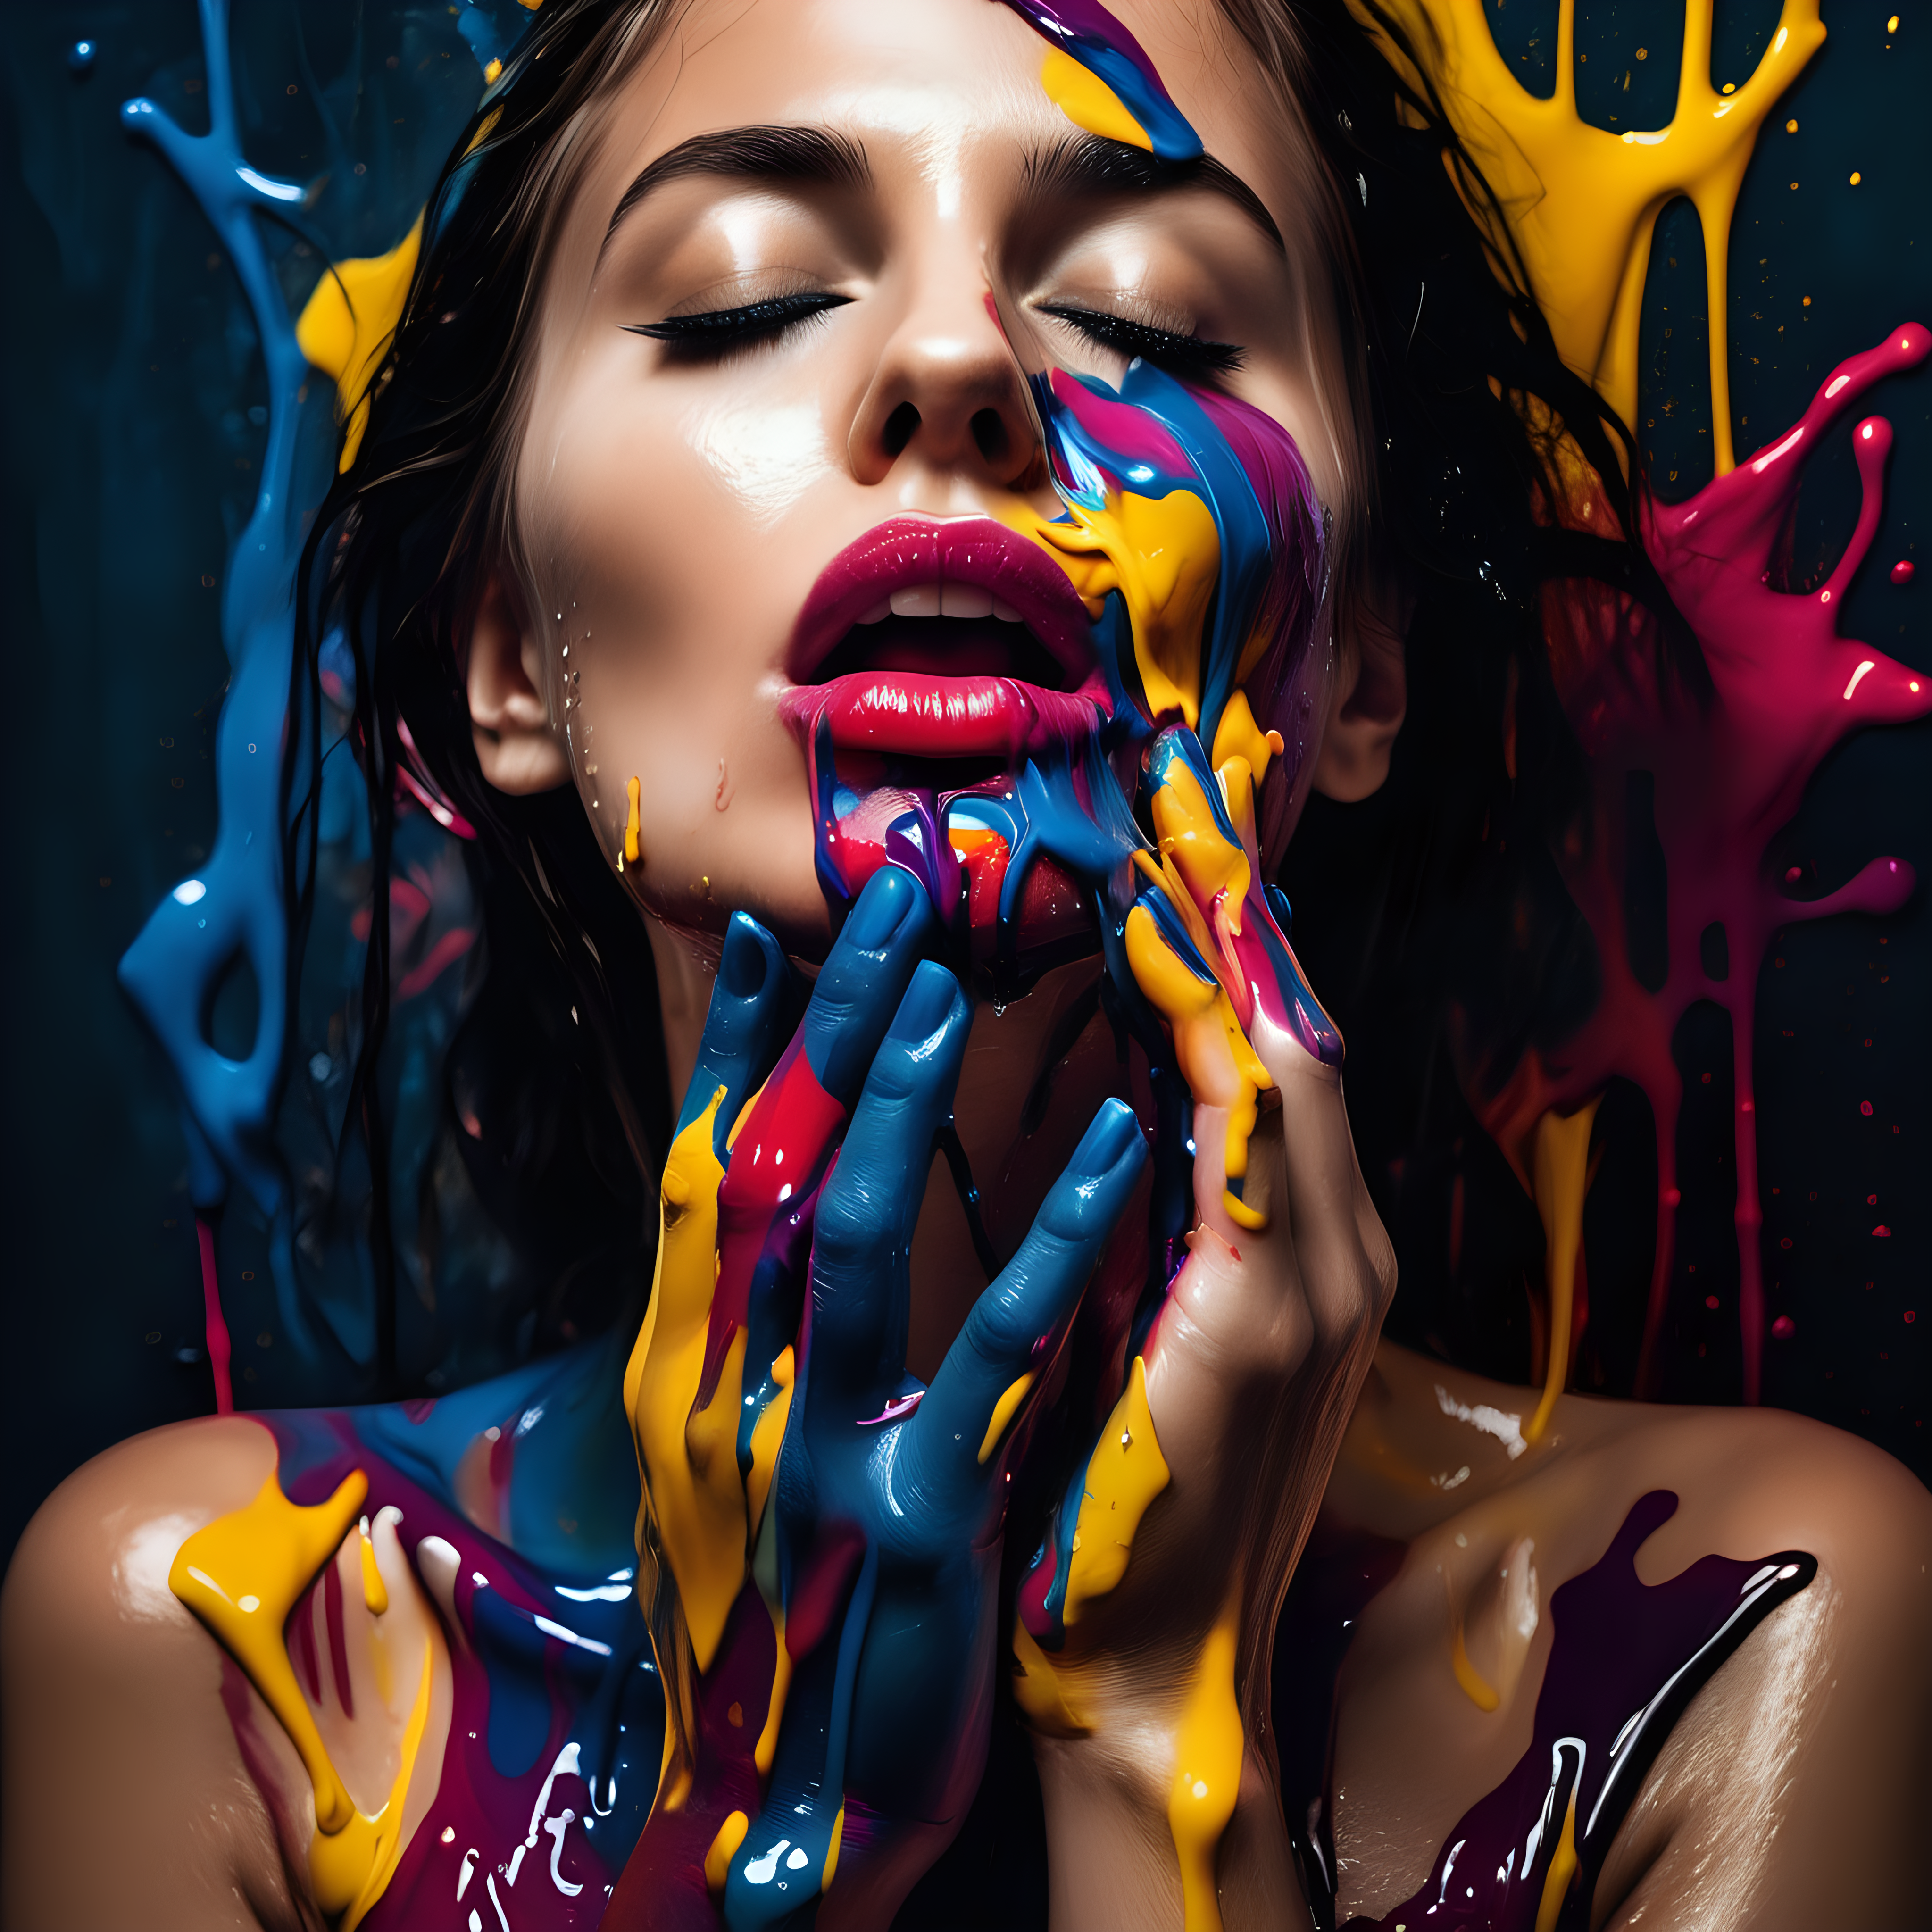 Create photo abstract artwork of a woman drenched